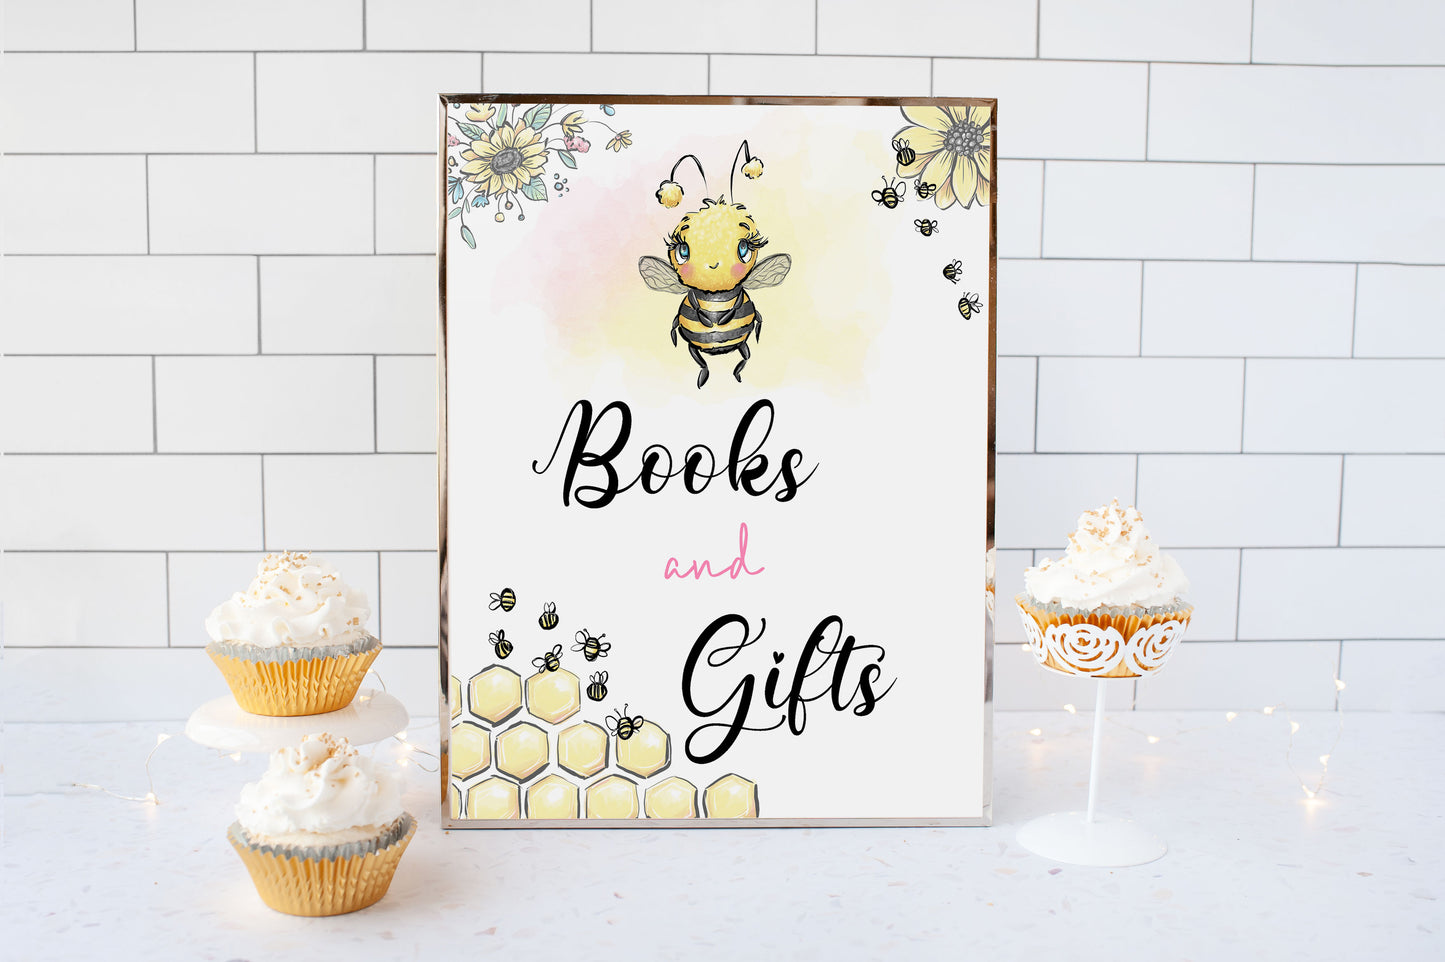 Bee Books and Gifts Sign | Bee theme Party Table Decoration - 61A